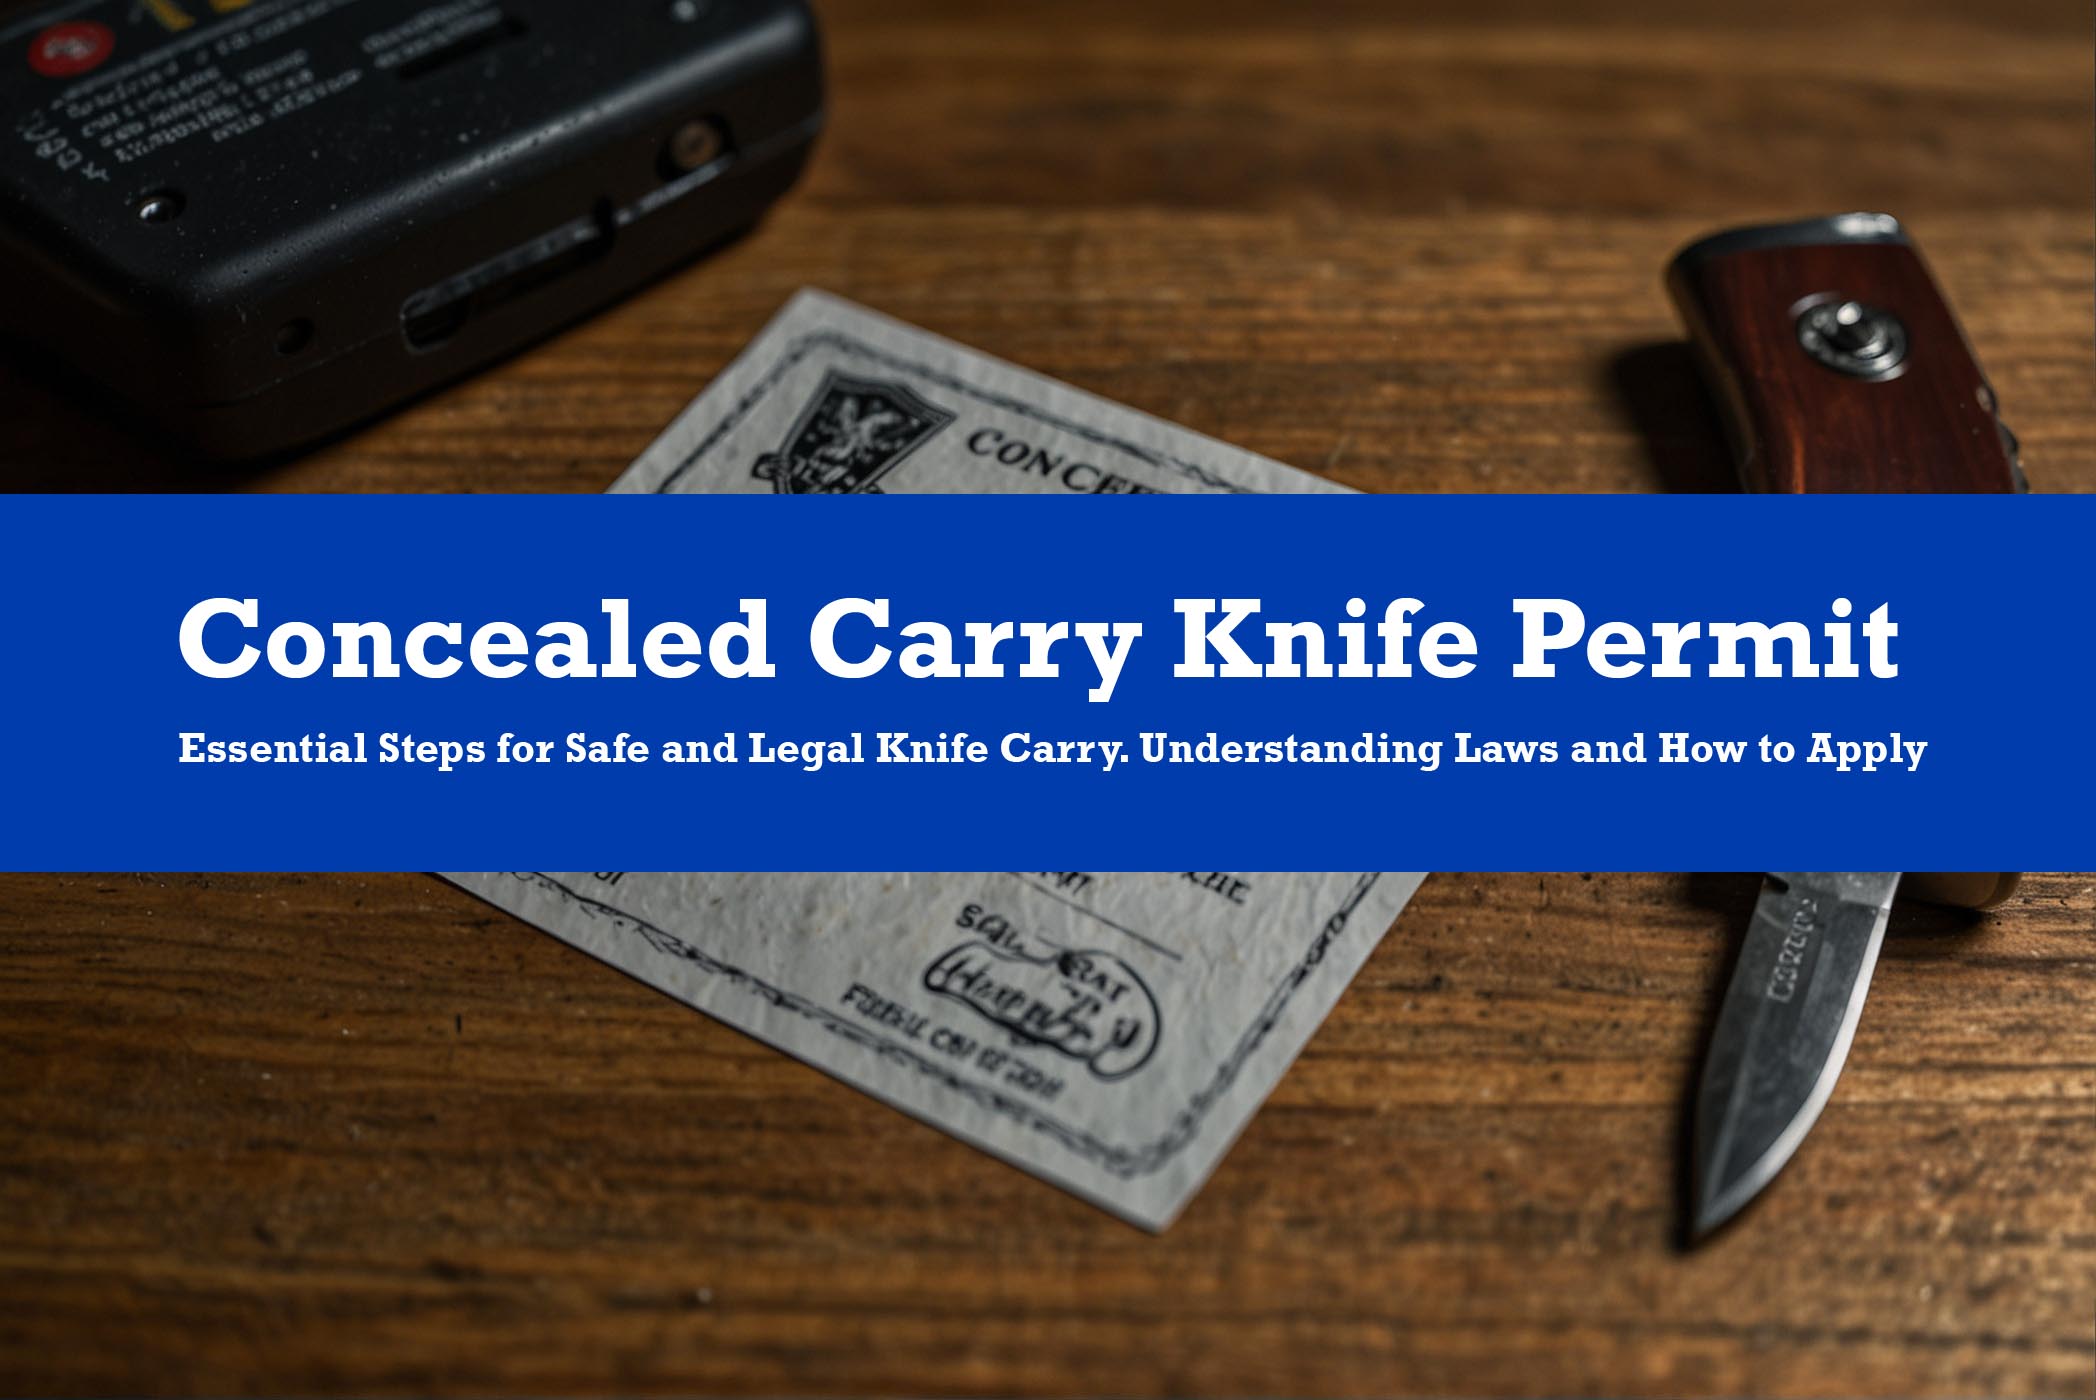 Concealed Carry Knife Permit